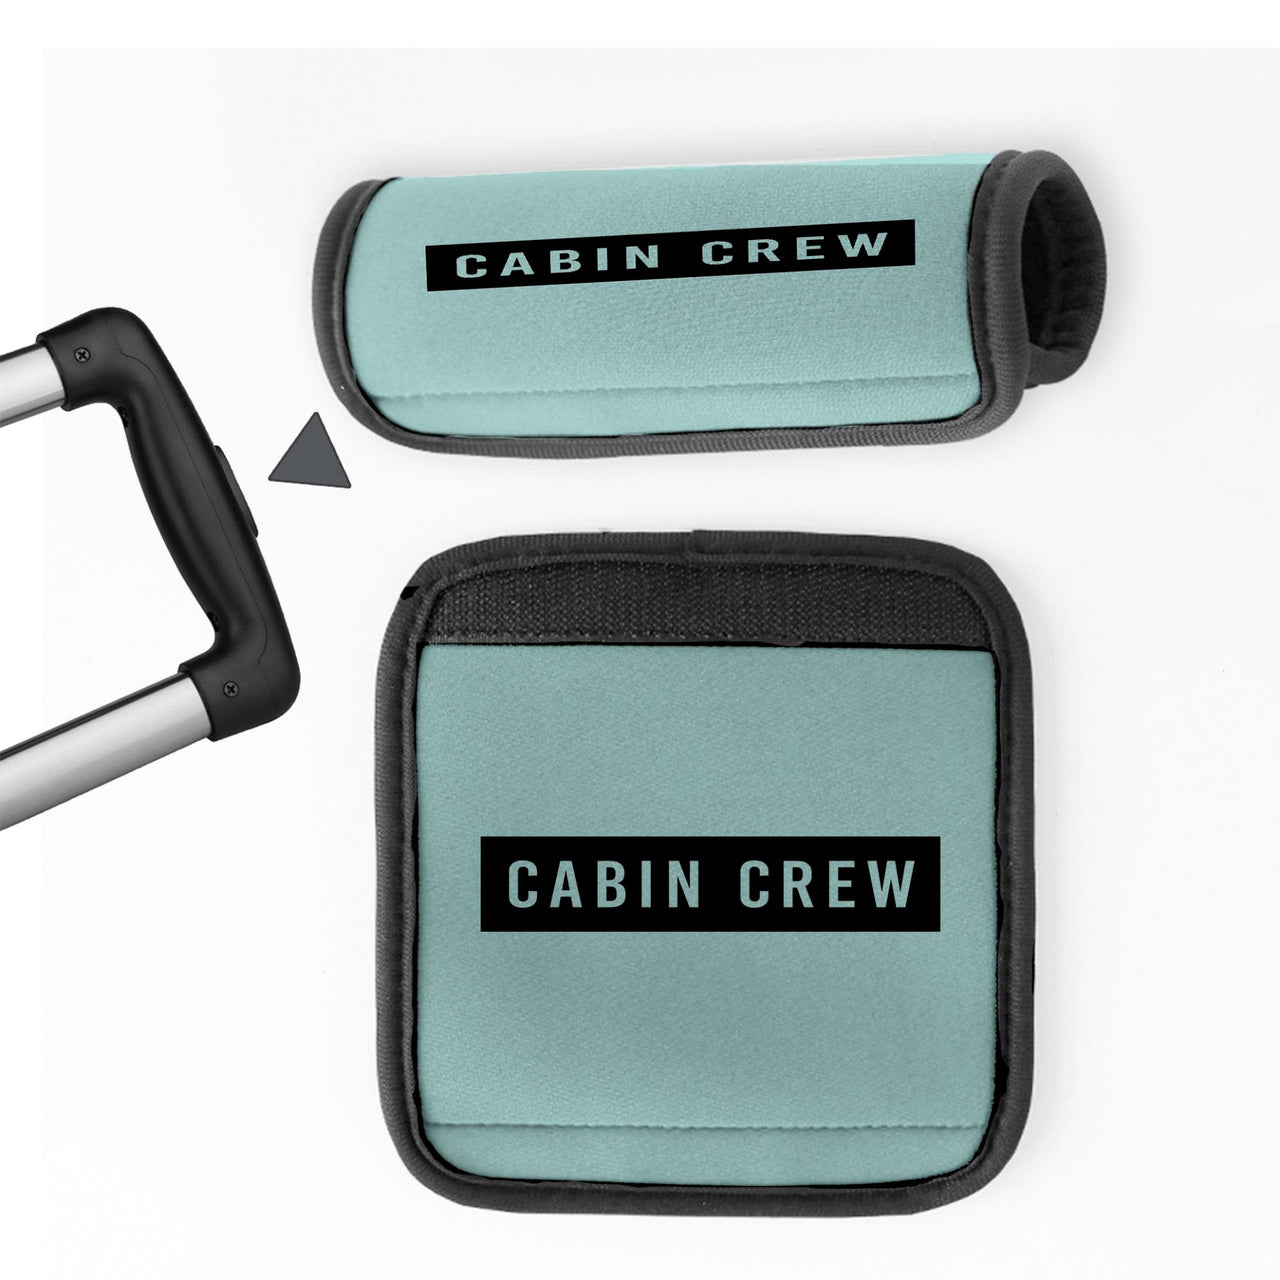 Cabin Crew Text Designed Neoprene Luggage Handle Covers